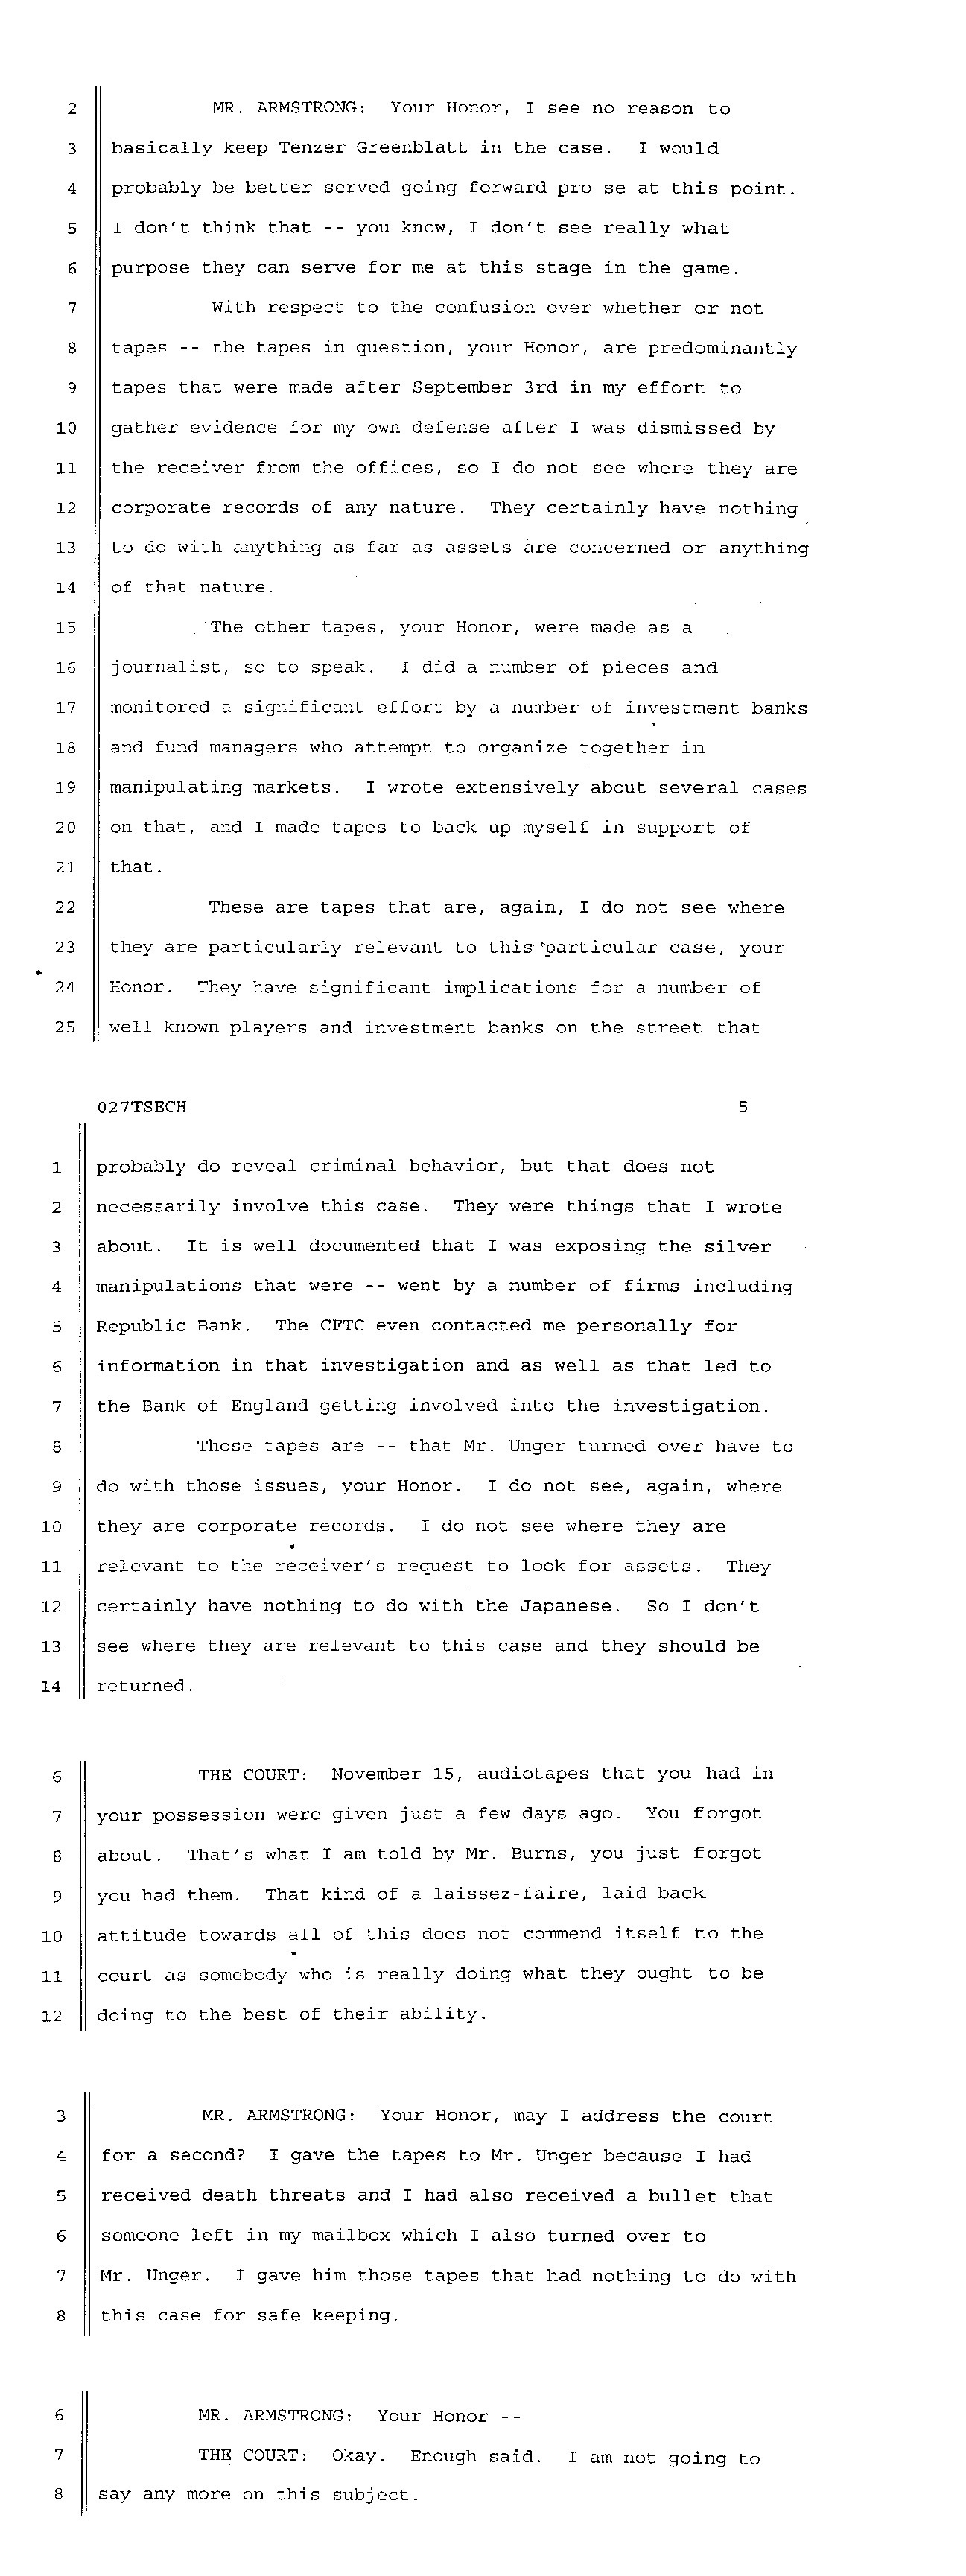 Tapes on Bank Manipulations in Armstrongs case TR 2 7 2000